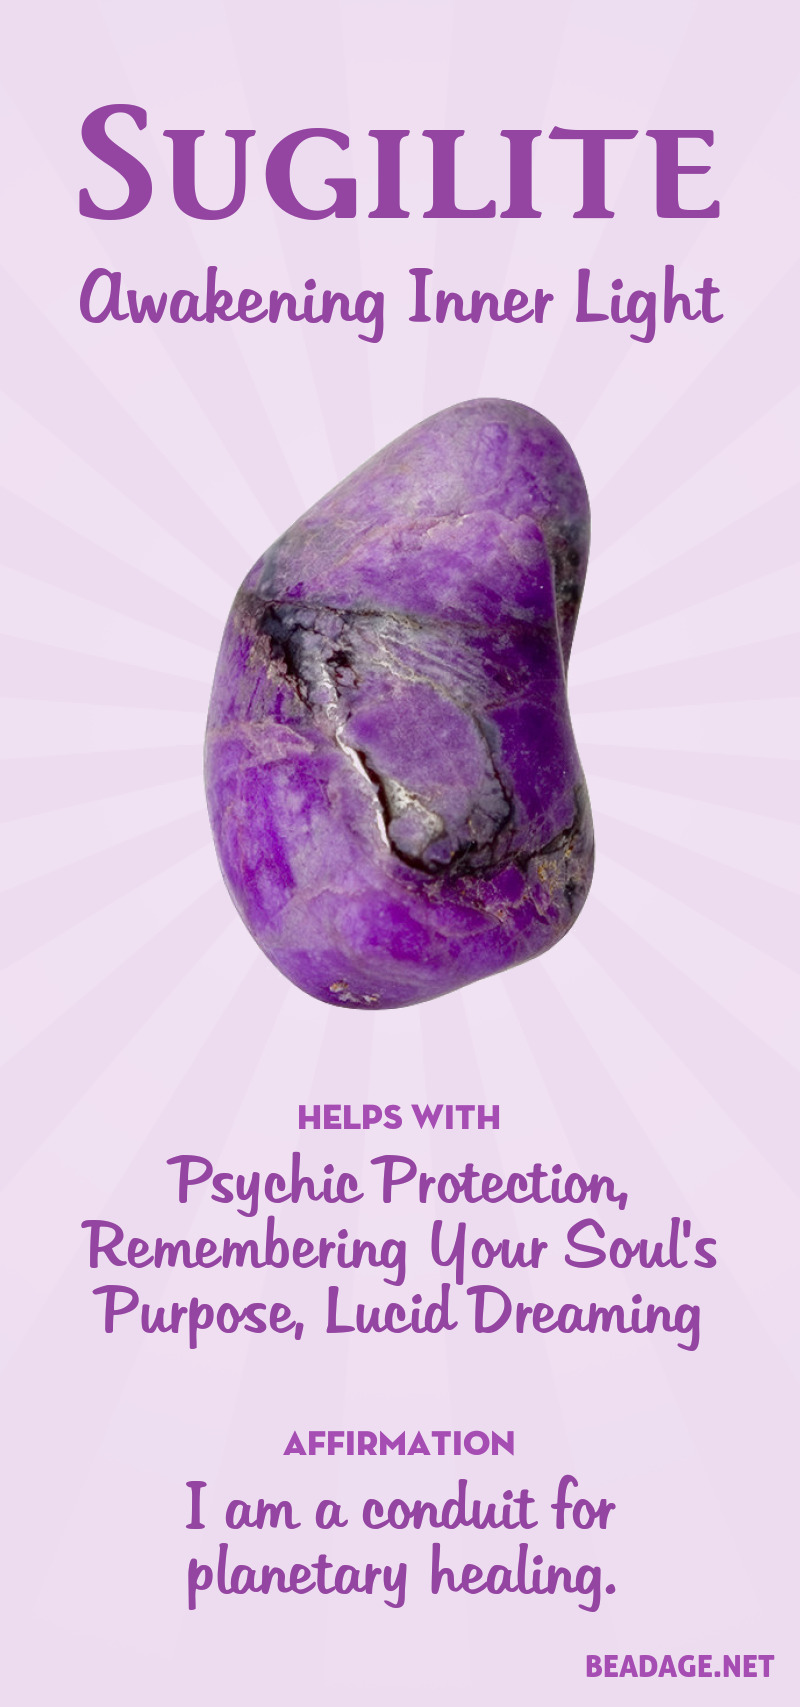 Sugilite is a purple gemstone that helps you remember your soul's purpose and pursue it. It also helps with lucid dreaming and provides psychic protection. Learn more about Sugilite meaning + healing properties, benefits & more. Visit to find gemstone meanings & info about crystal healing, stone powers, and chakra stones. Get some positive energy & vibes! #gemstones #crystals #crystalhealing #beadage